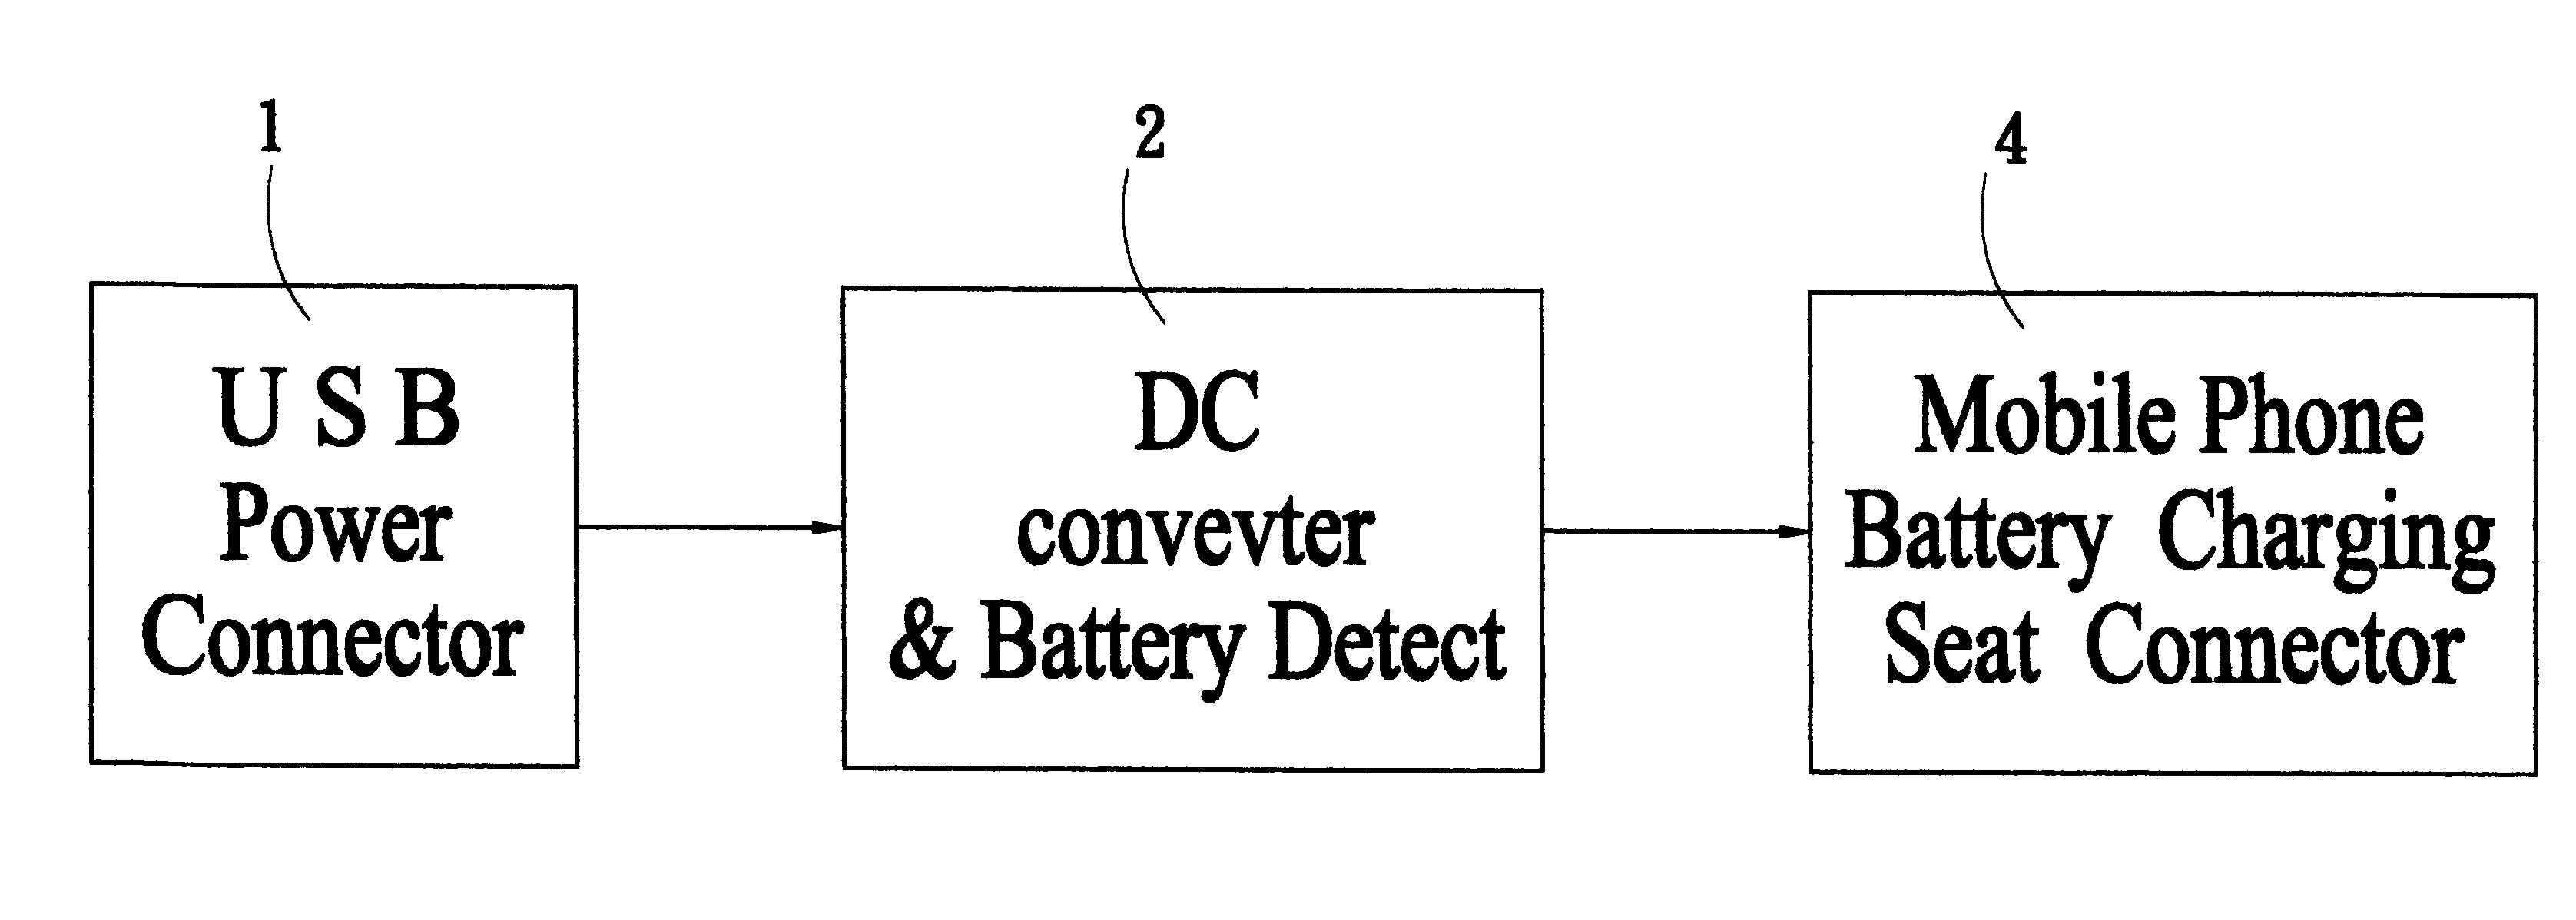 Mobile phone battery charge with USB interface